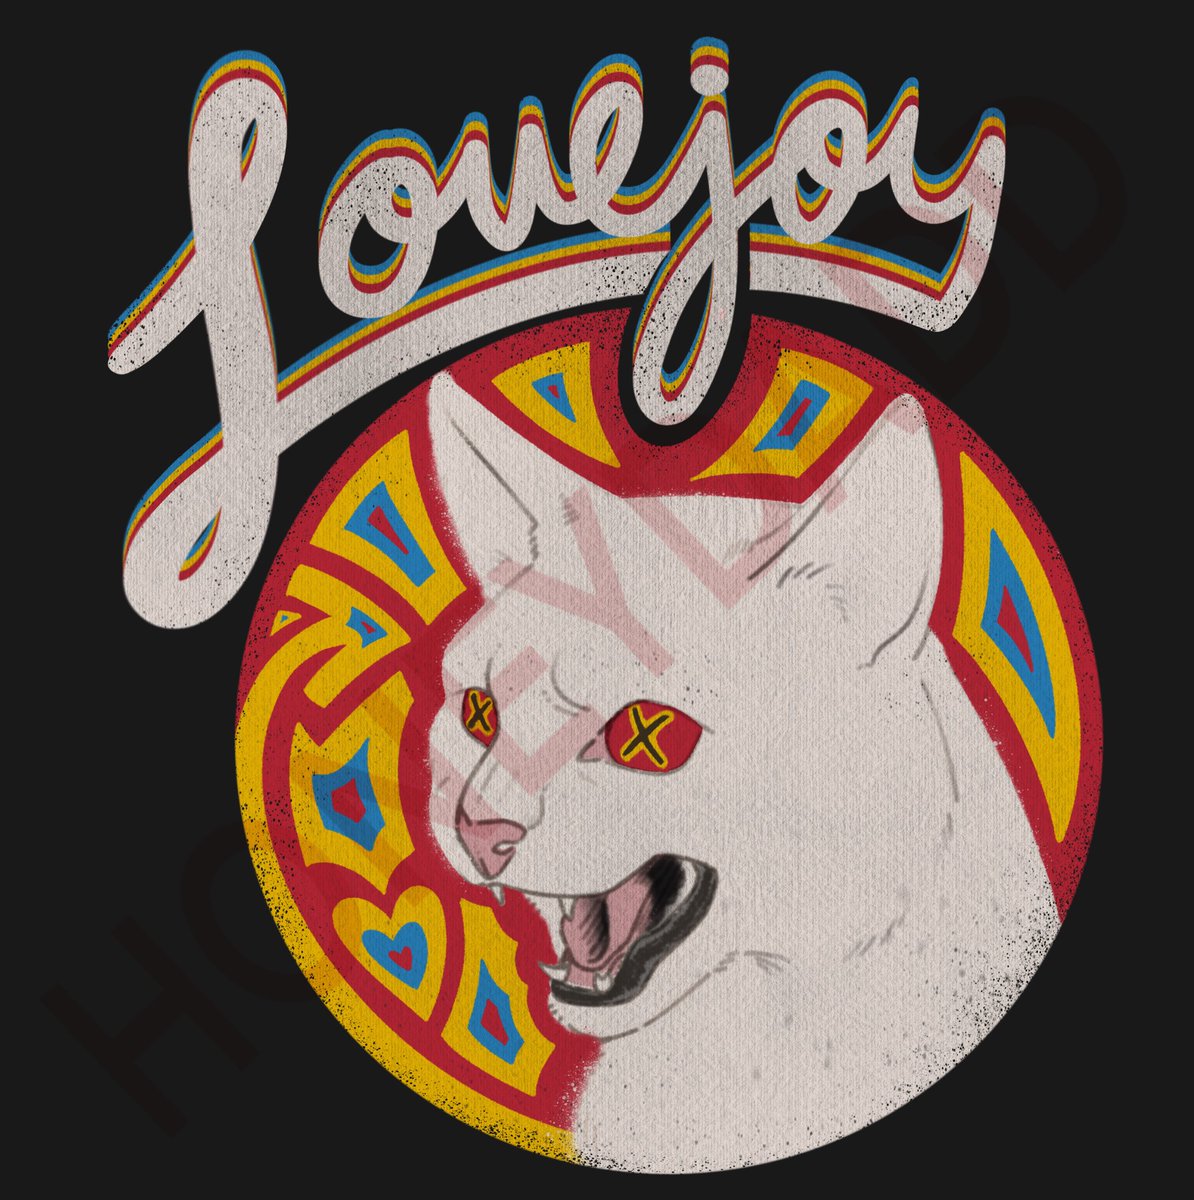 the new lovejoy twitter layout reminded me of 80s/90s band tees so I did my take on a lovejoy band tee 
-
#lovejoyfanart 